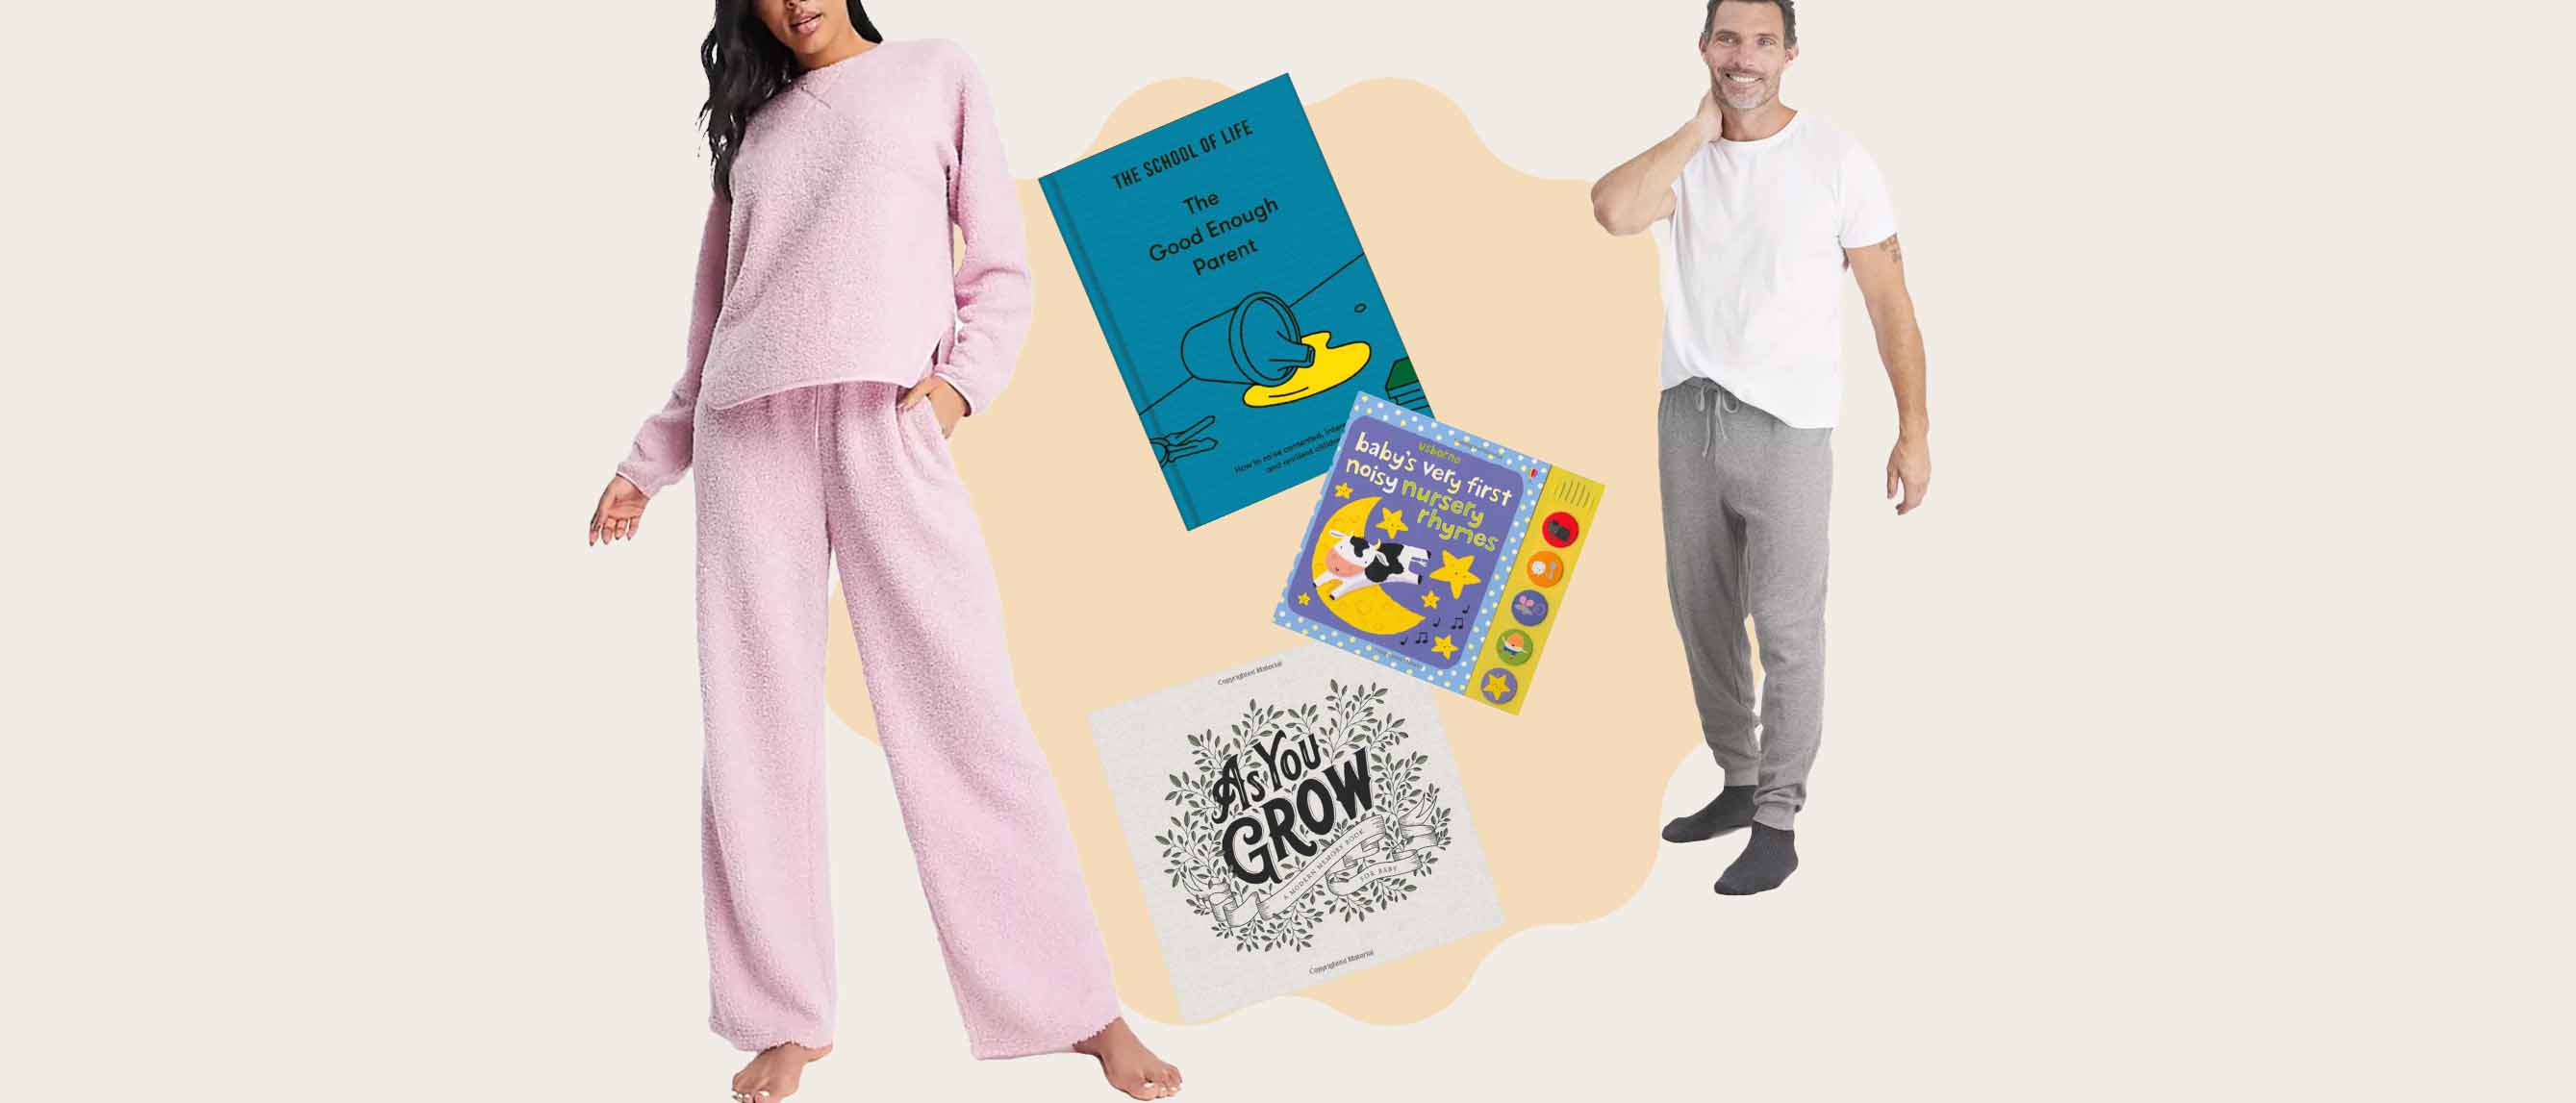 15 Thoughtful Gifts for New Parents - Shop Girl Daily